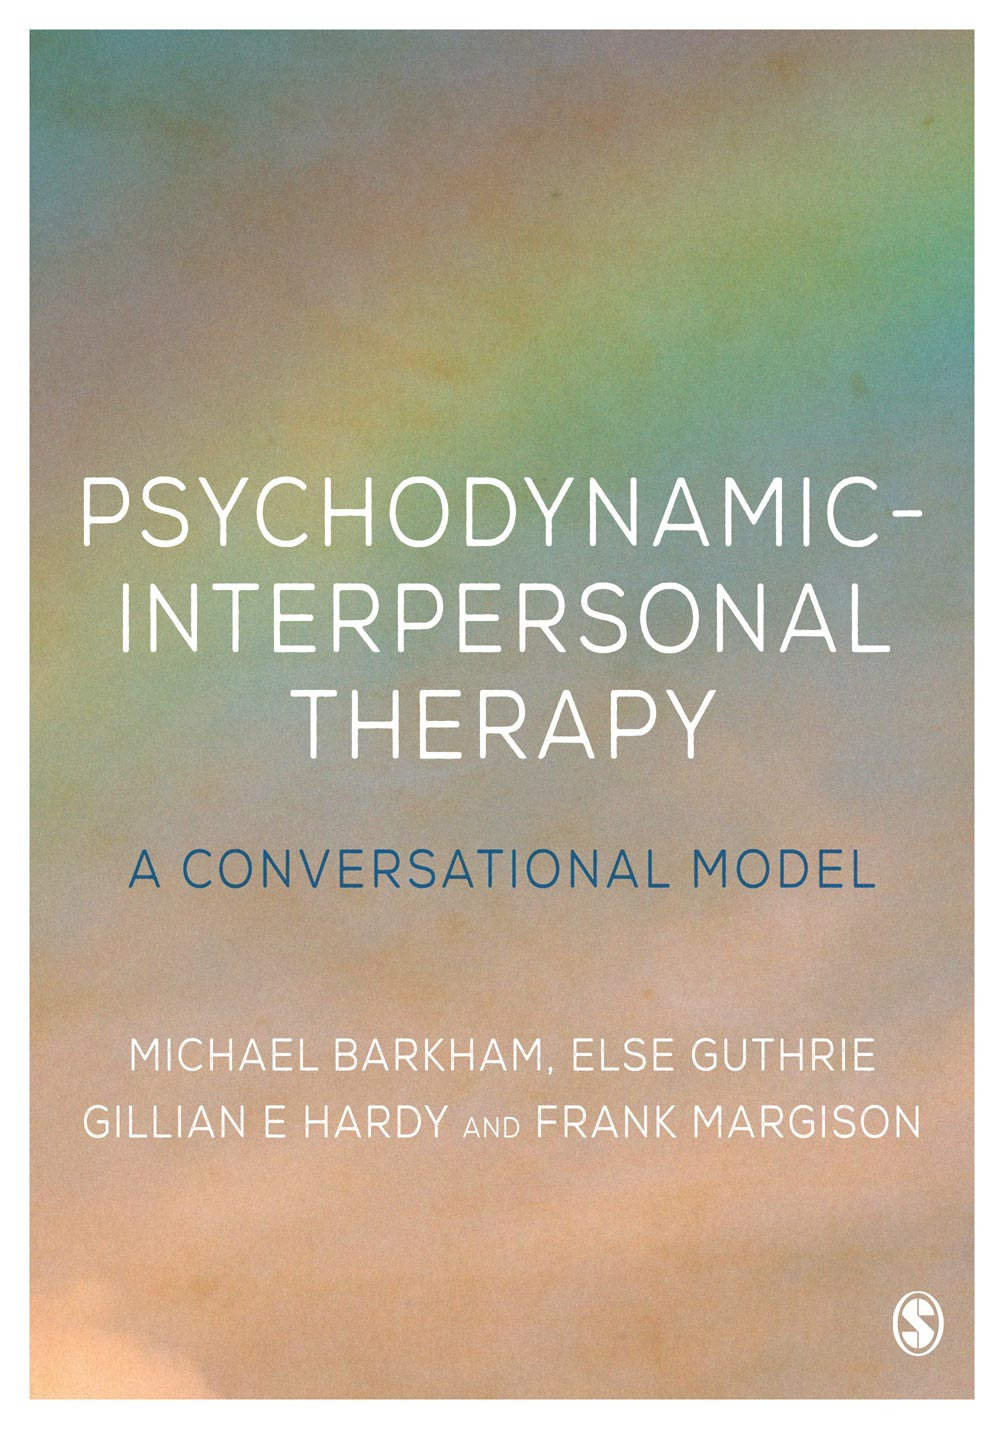 Psychodynamic-Interpersonal Therapy: A Conversational Model  book cover